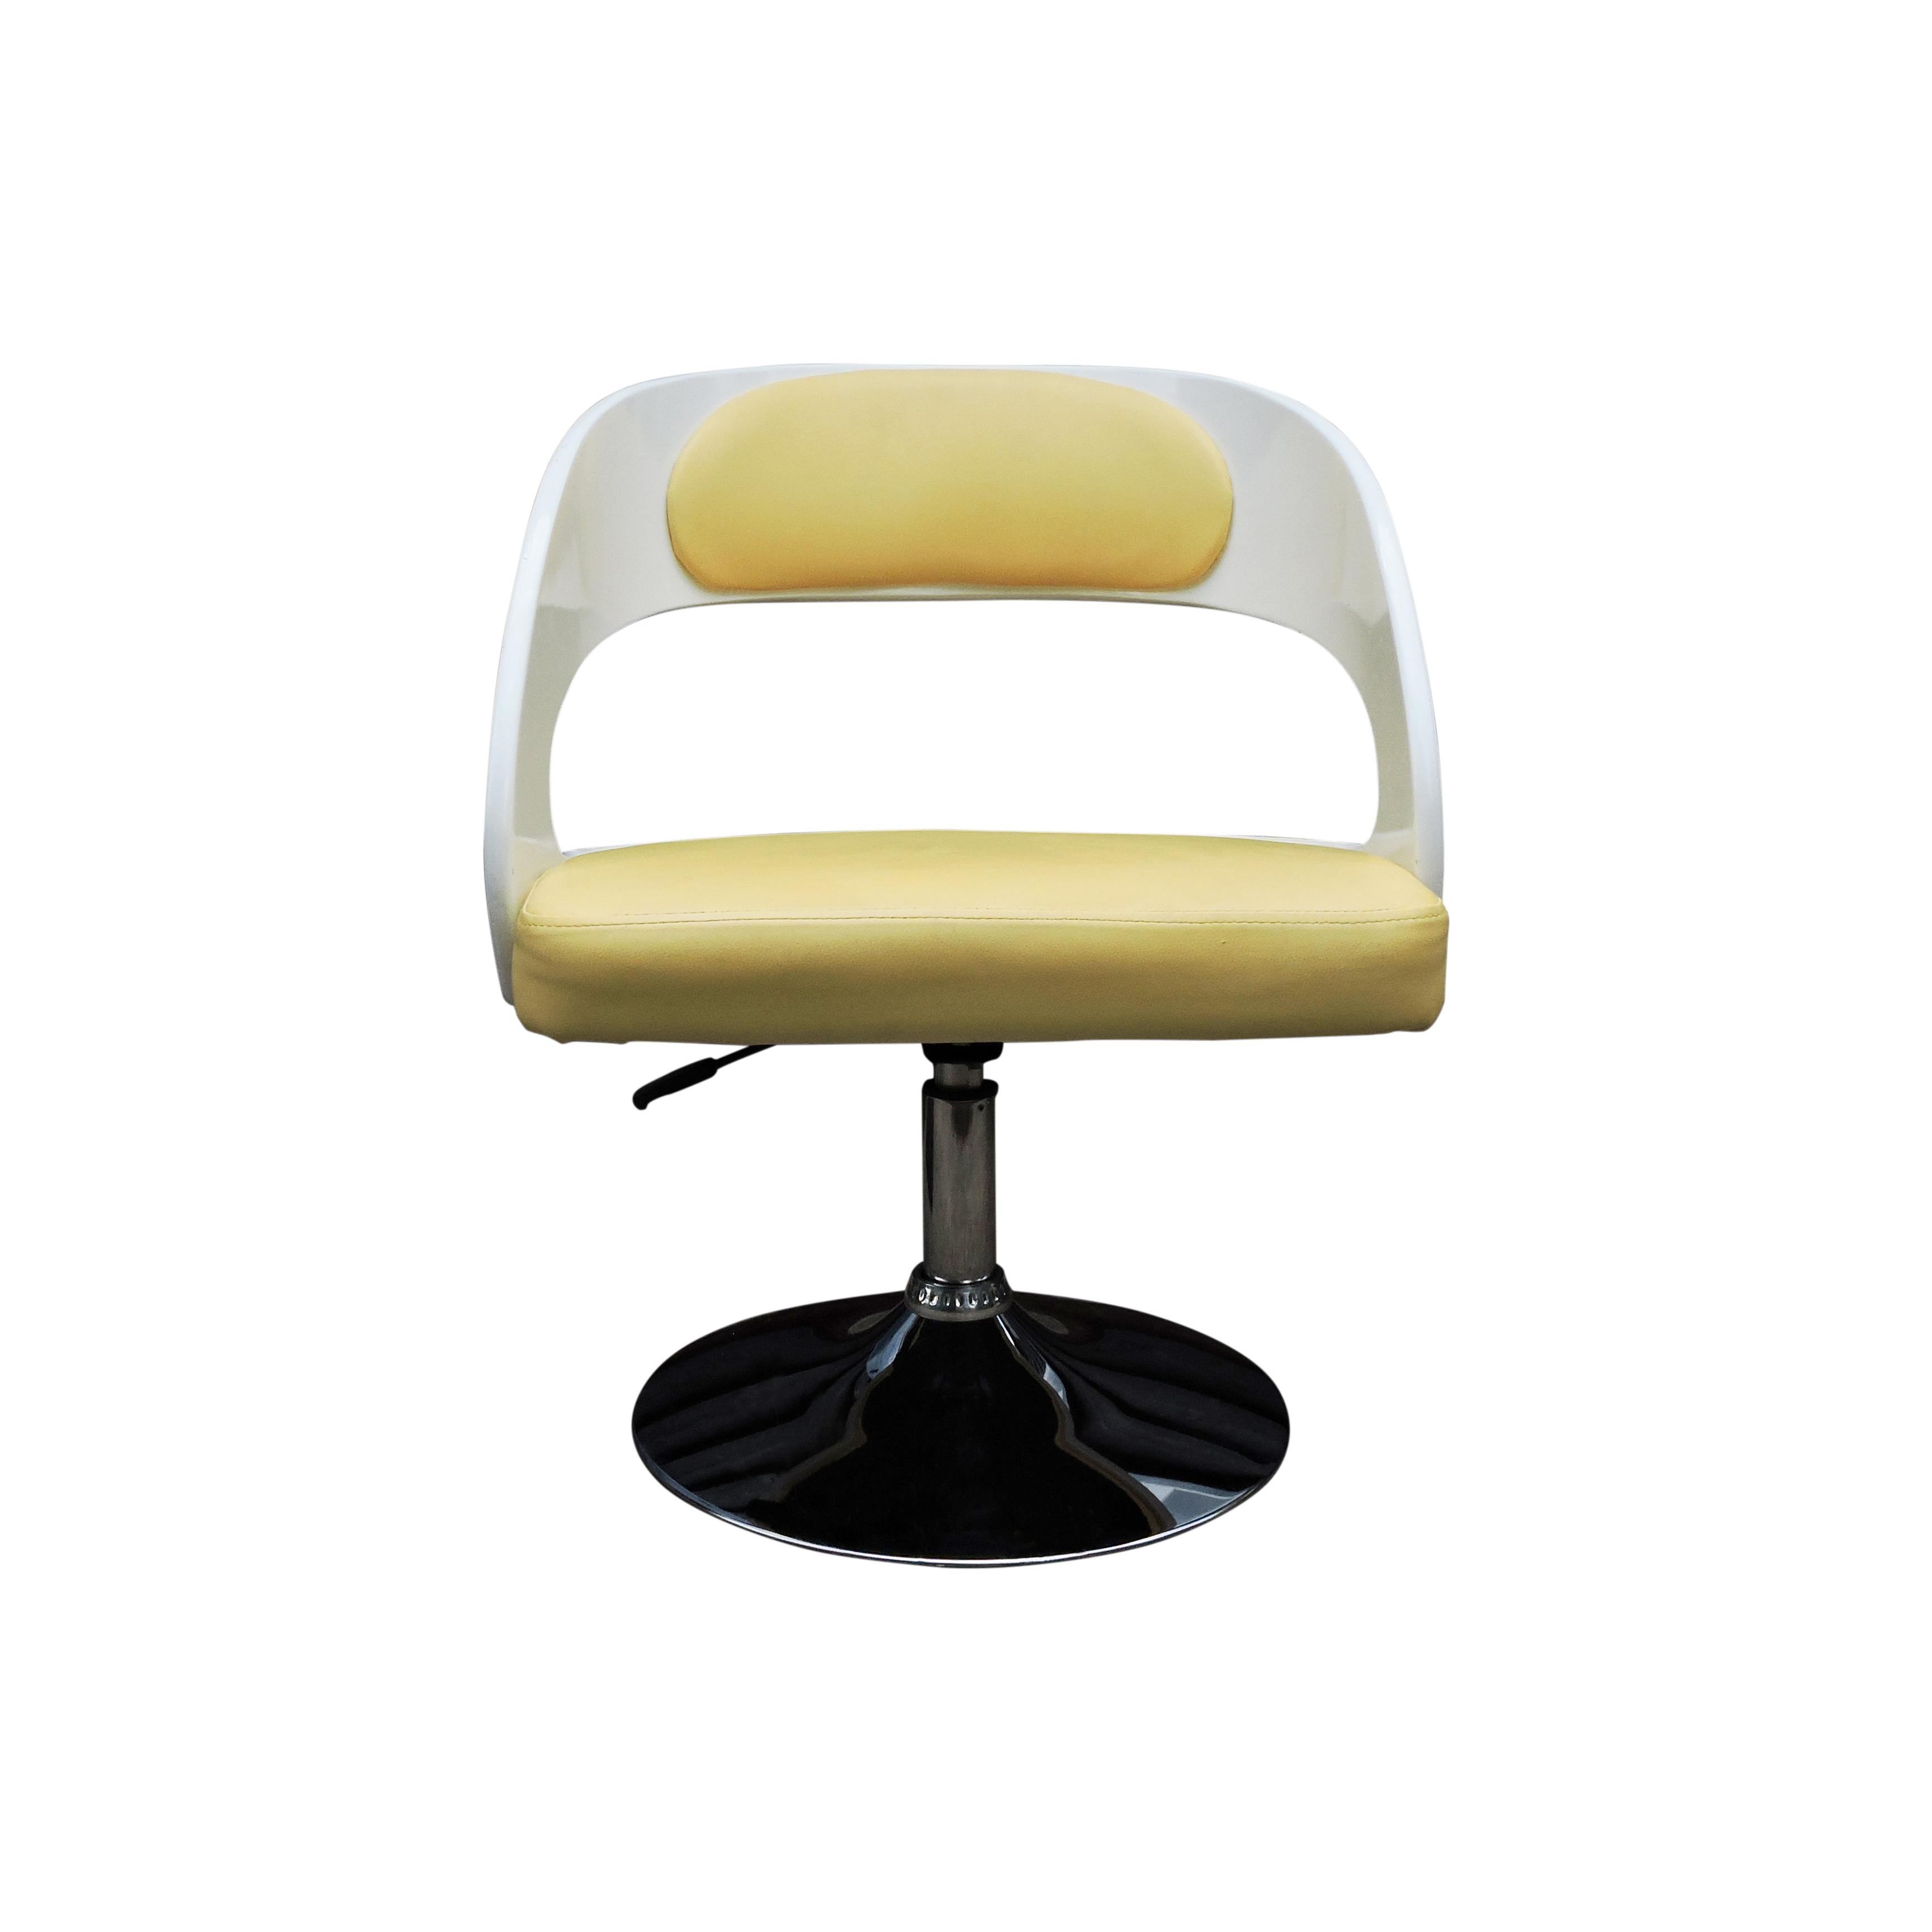 This set of four white-painted wooden salon chairs feature yellow faux hide seat covers and are raised on chromium-plated, height adjustable bases.